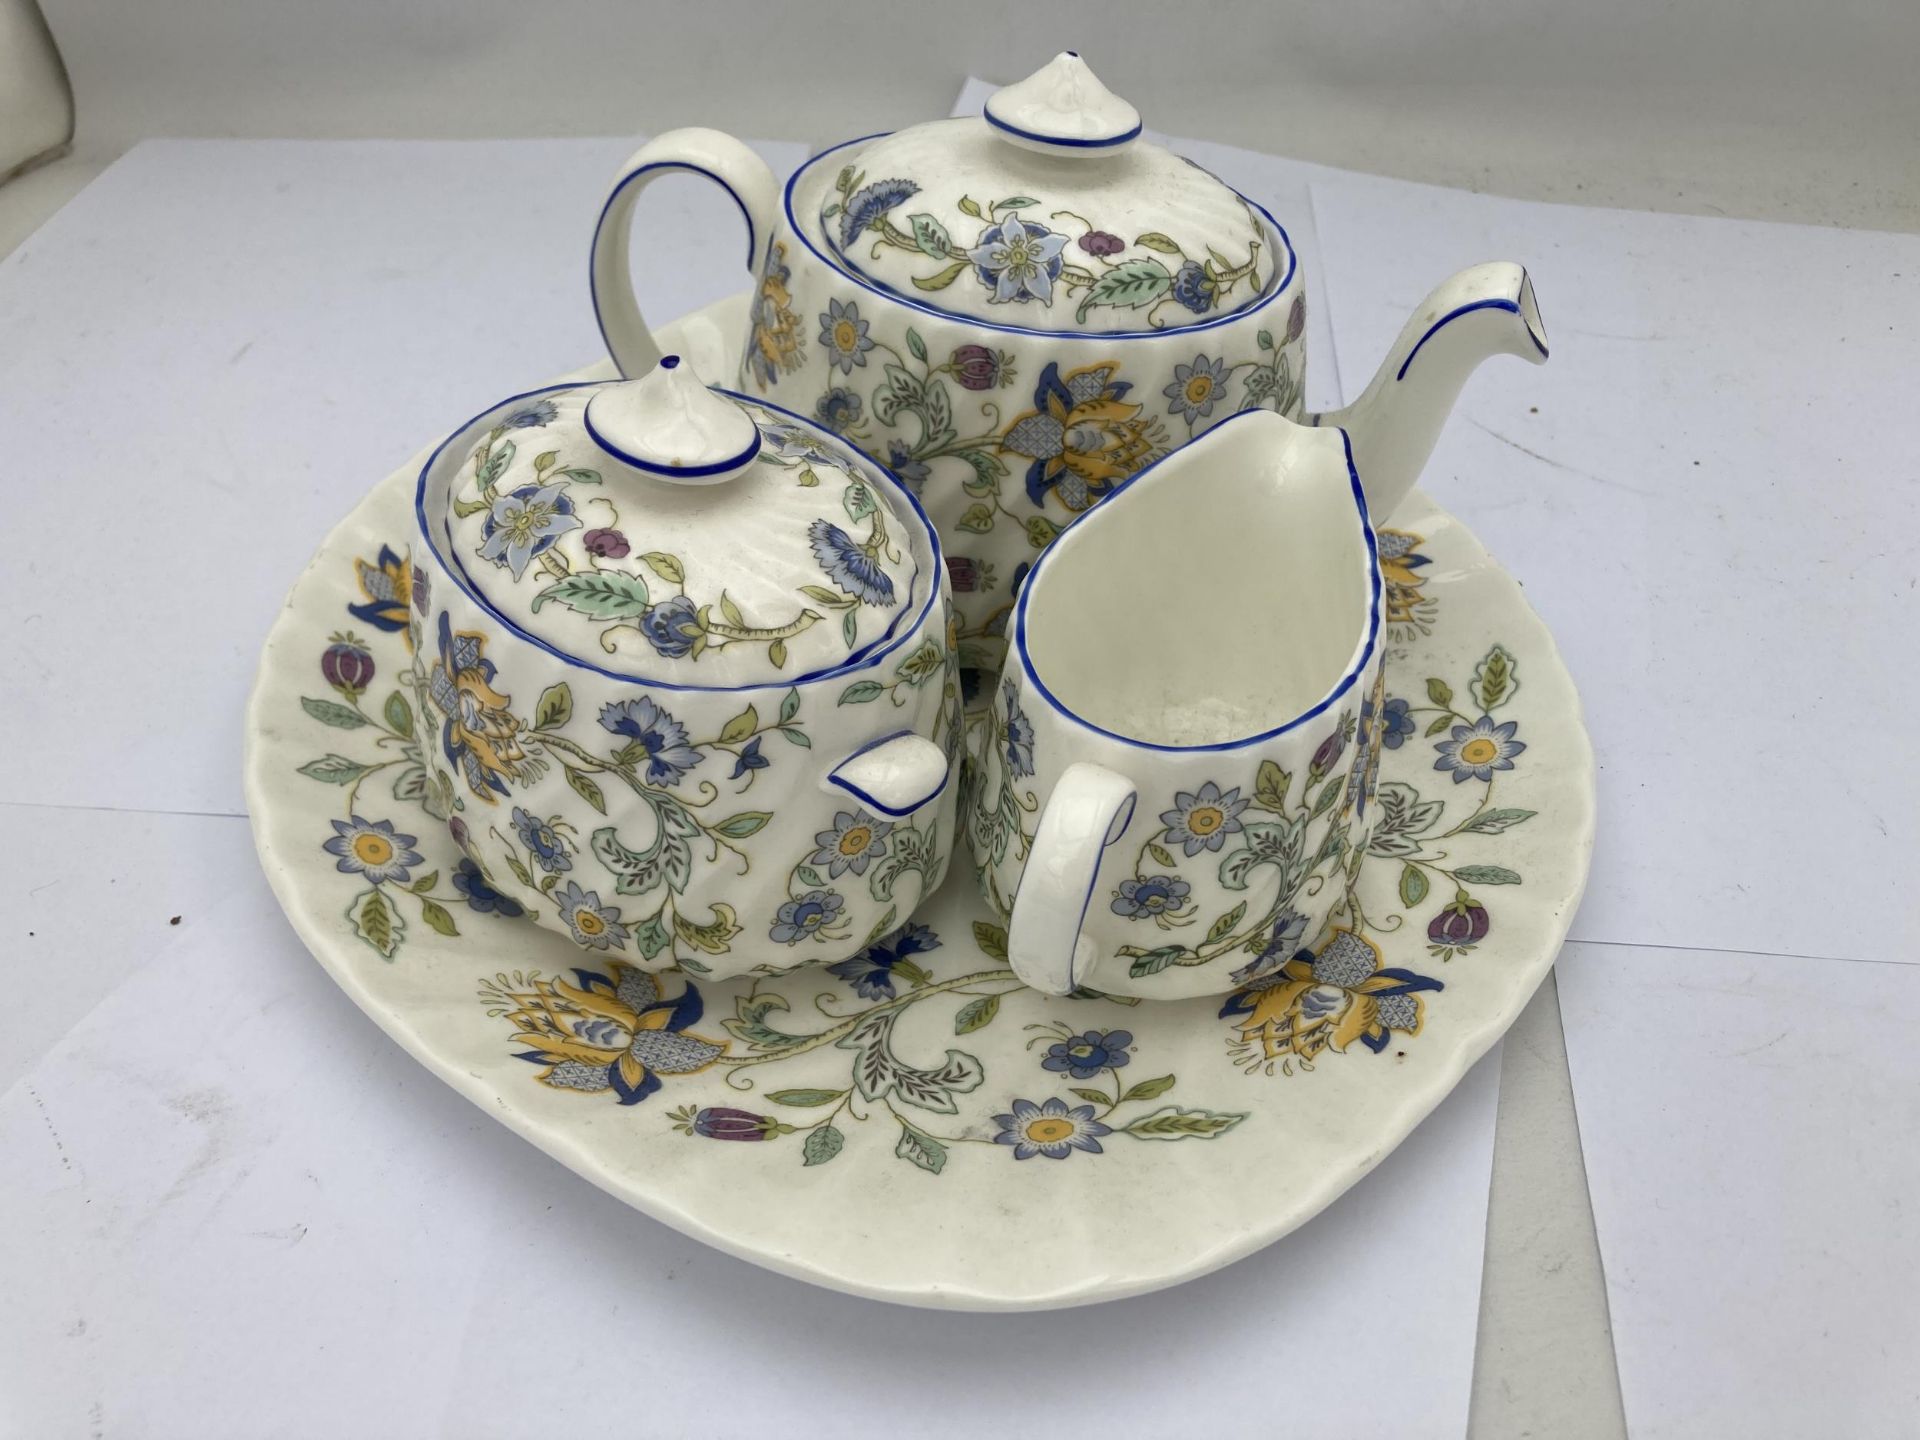 A MINTON HADDON HALL BLUE PATTERN TEA FOR ONE SET - Image 2 of 5